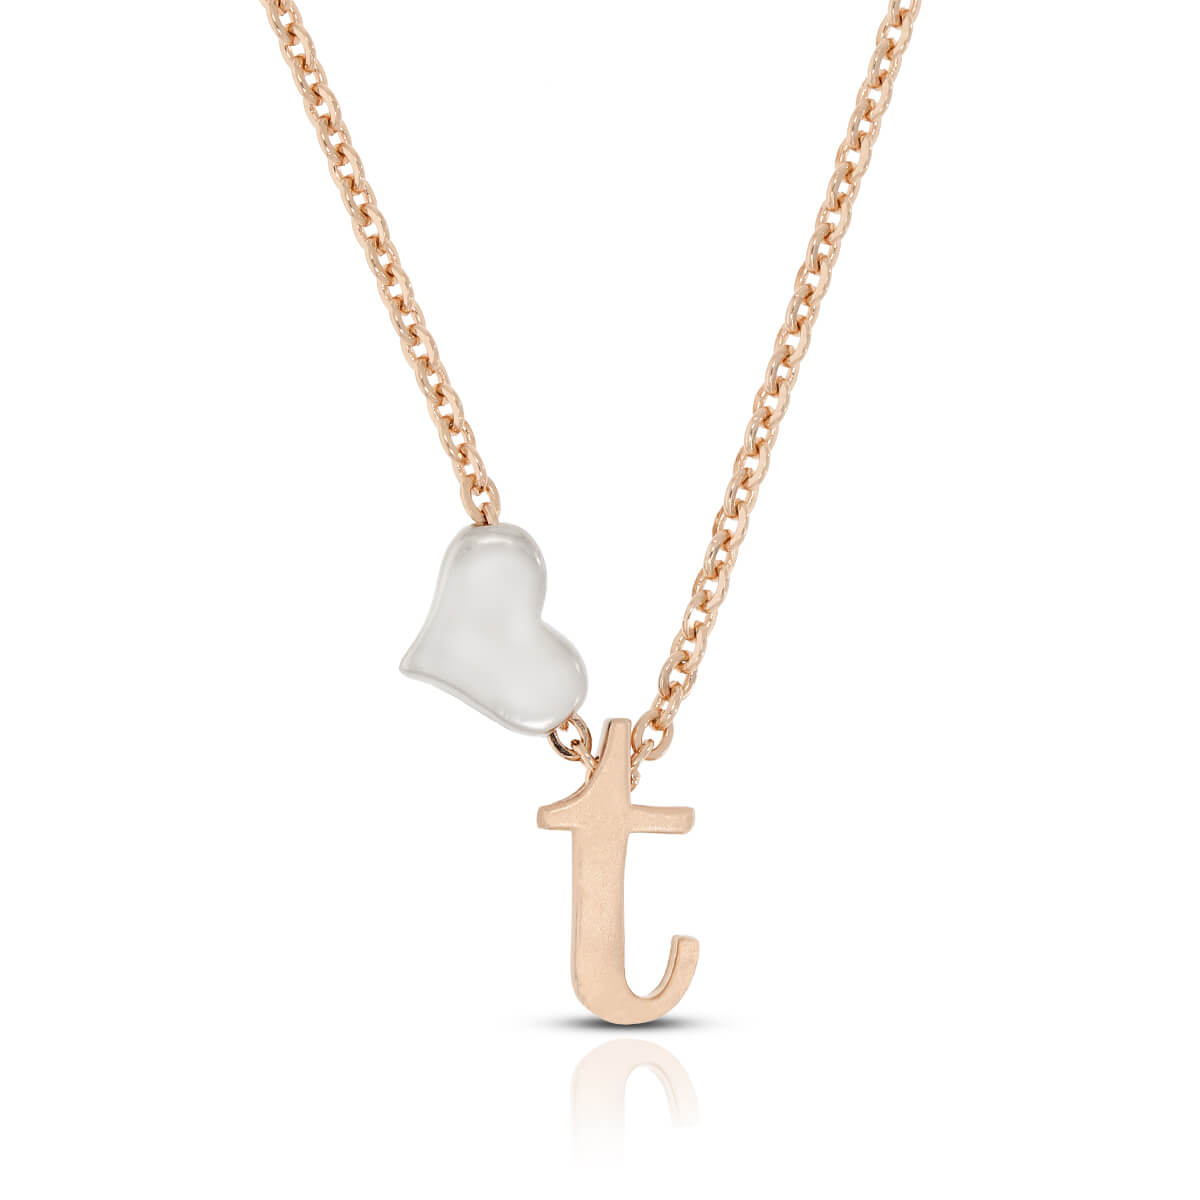 Sterling Silver "T" Initial Necklace